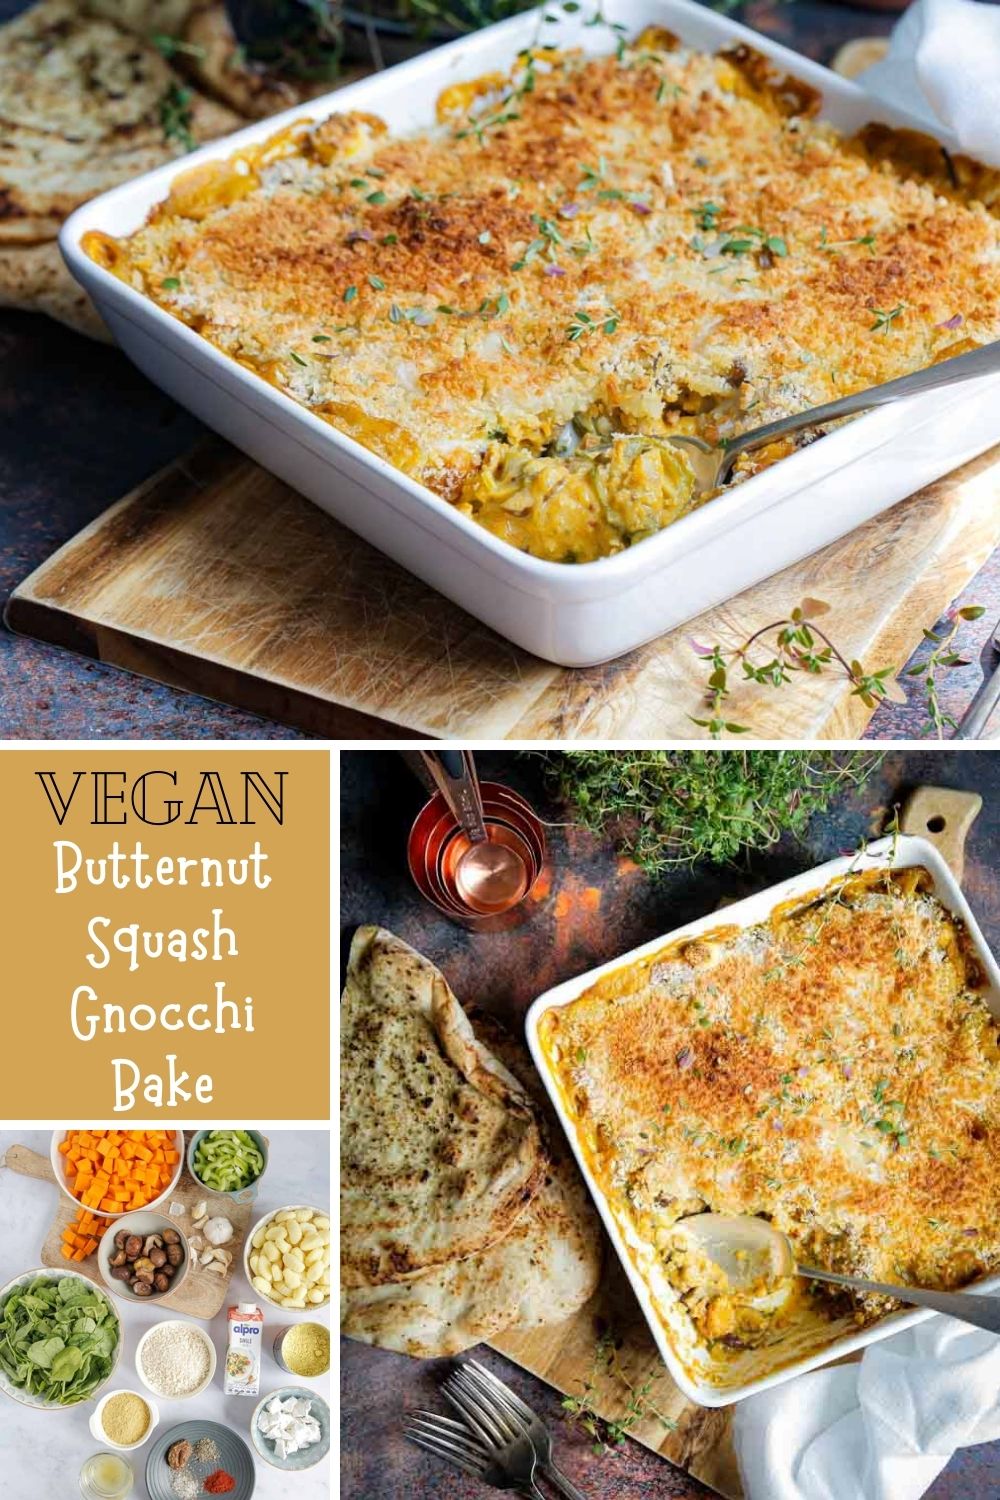 This vegan gnocchi bake is cosy, comfort food heaven that's easy, cooked in one pan and totally delivers on warming, delicious flavours! Recipe on thecookandhim.com | #vegan #veganmeal #veganrecipe #autumnrecipe #fallrecipe #gnocchi #gnocchibake